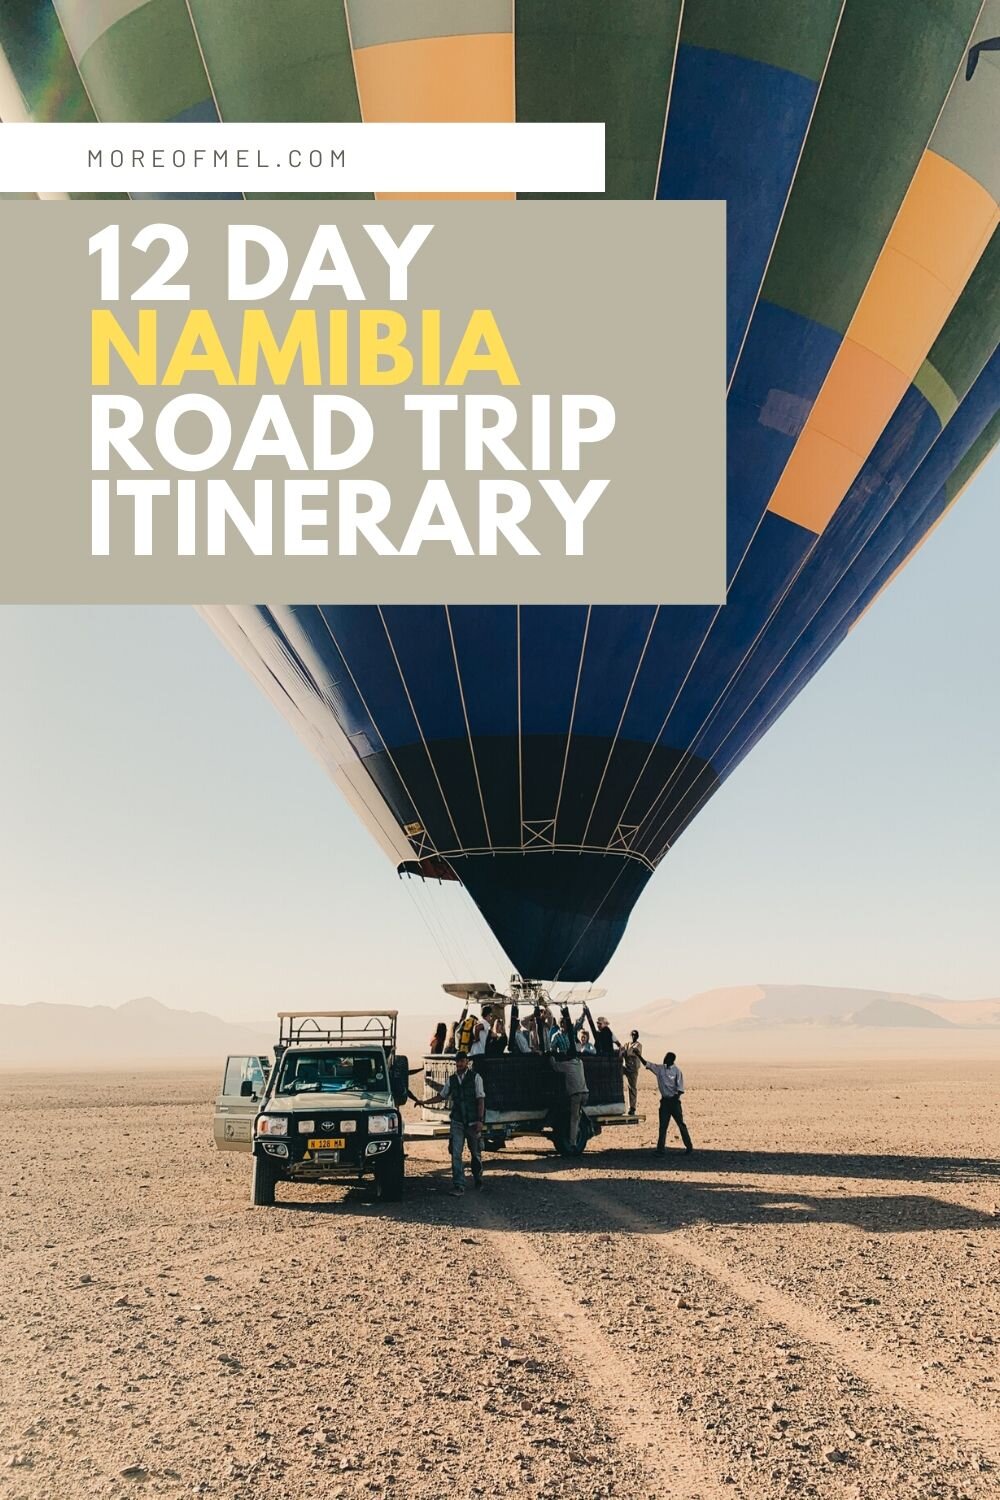 12 Day Namibia road trip itinerary